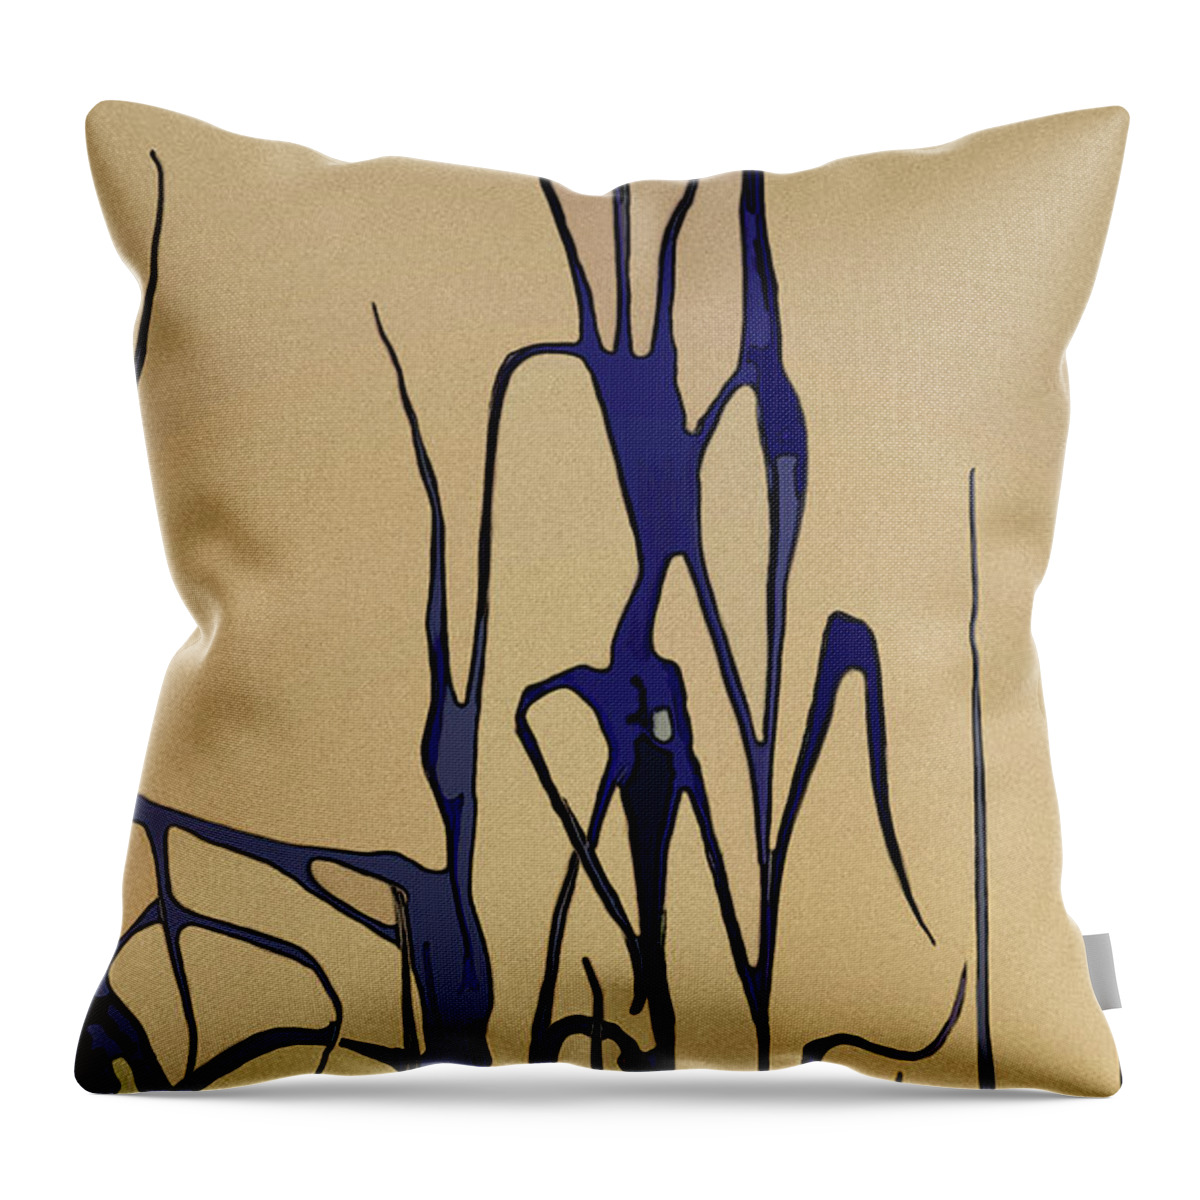 Seagrass Throw Pillow featuring the digital art Afternoon Shadows by Gina Harrison